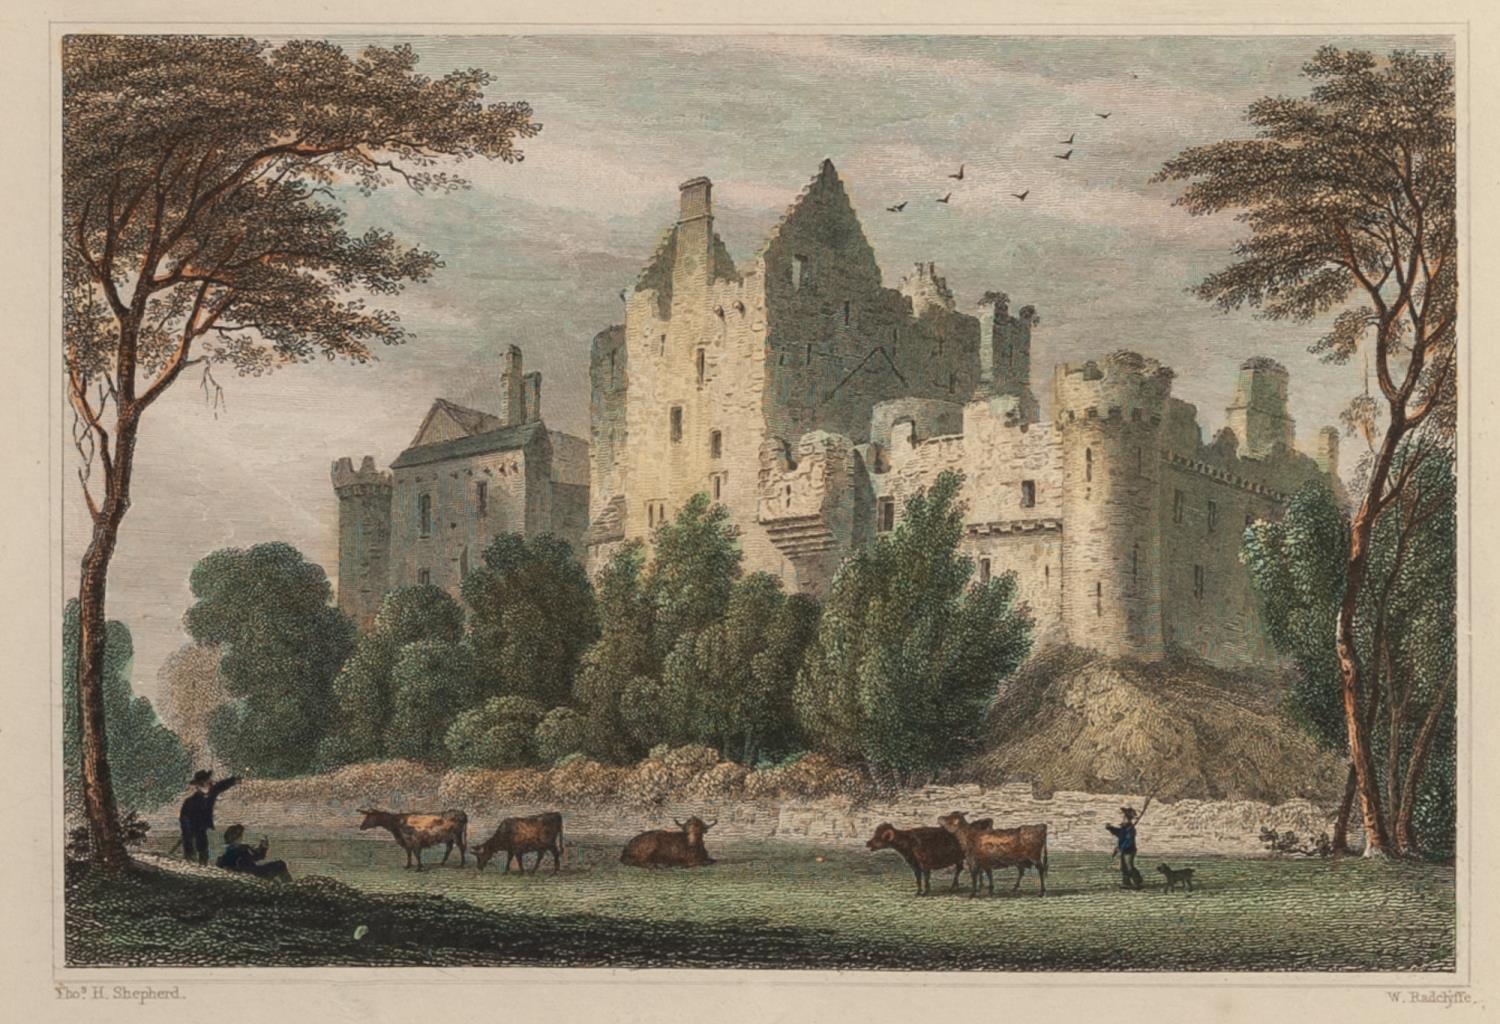 FOUR 19th CENTURY LATER HAND COLOURED BOOK PLATE PRINTS OF SCOTTISH INTEREST - Image 2 of 4